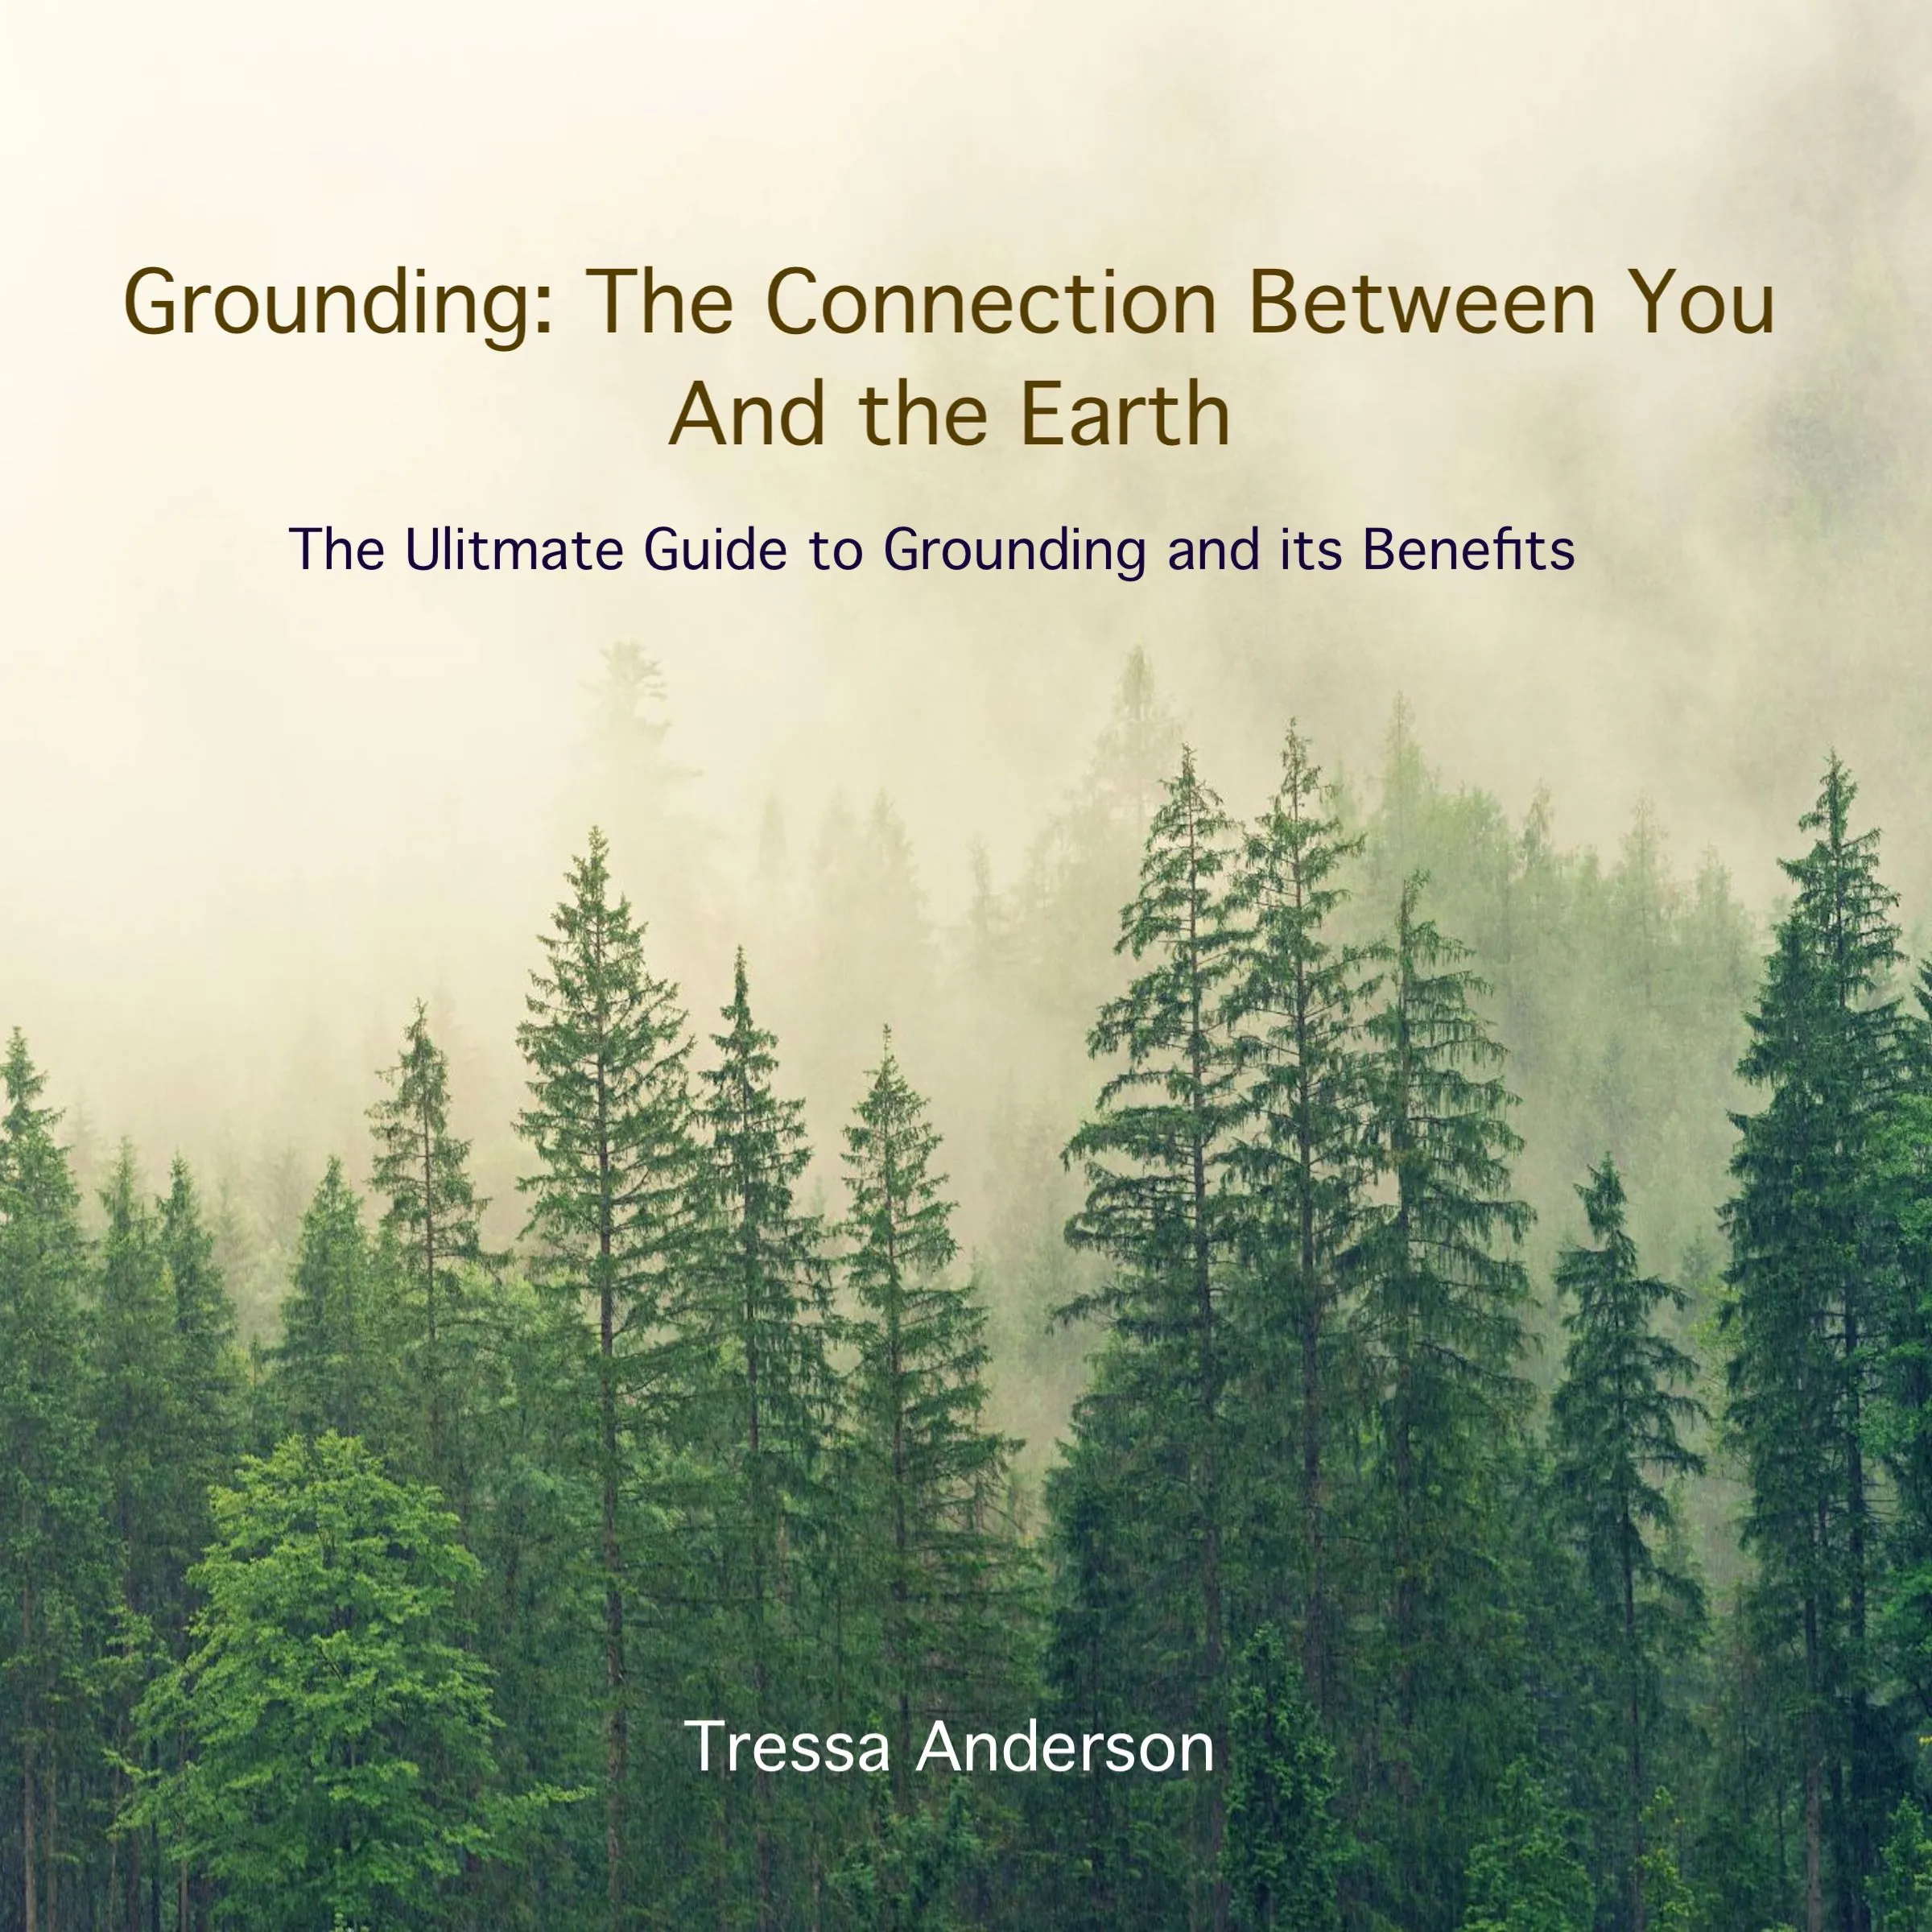 Grounding: The Connection Between You and the Earth by Tressa Anderson Audiobook